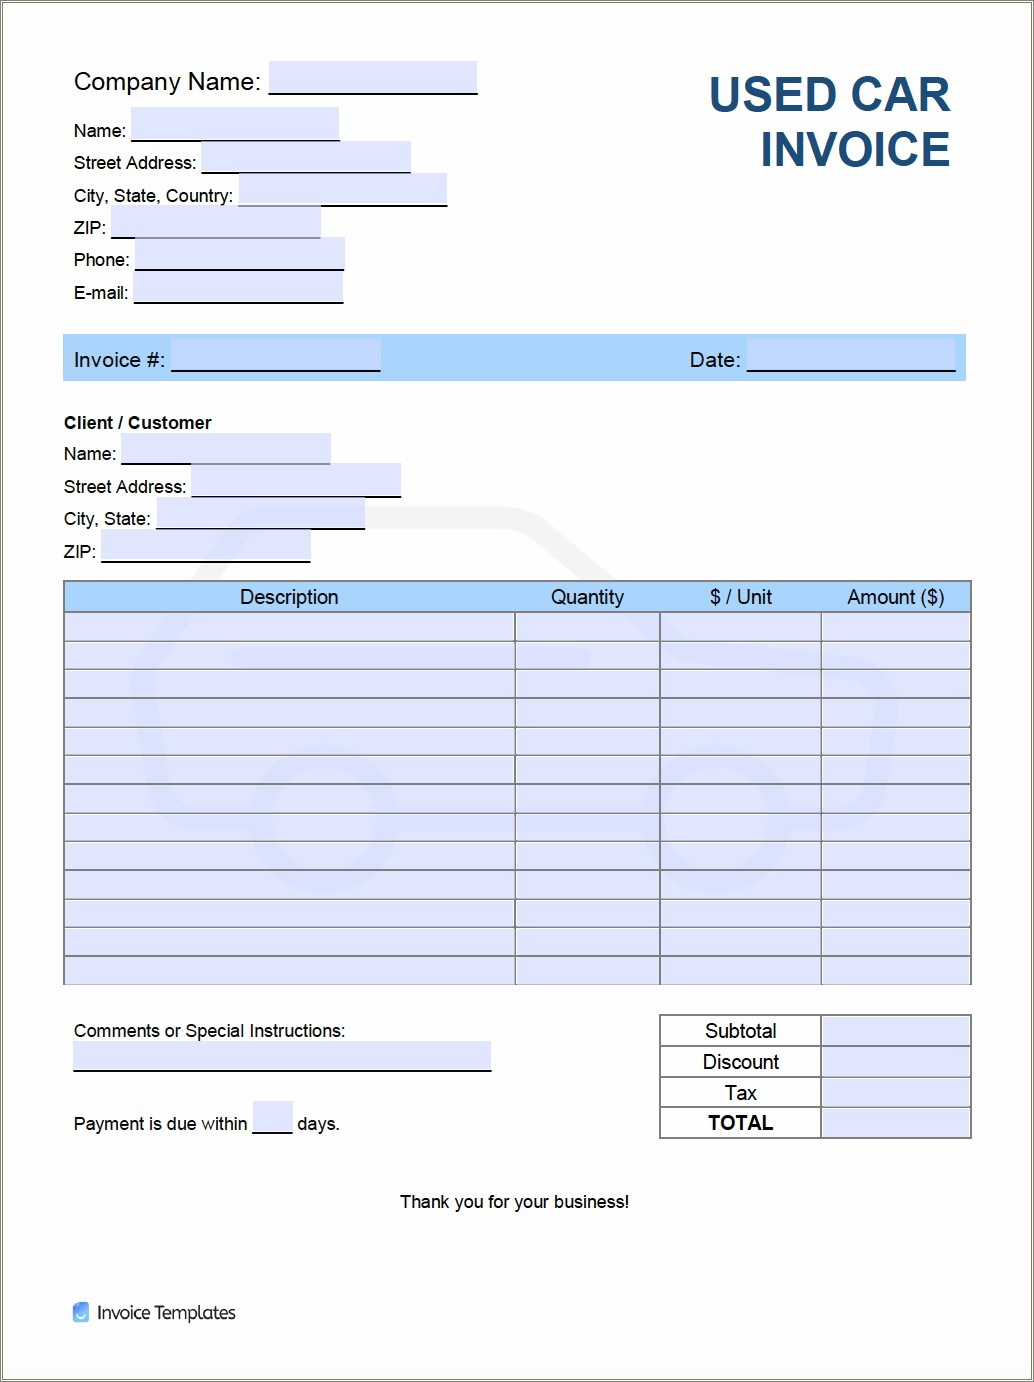 Free Template For Used Car Bill Of Sale